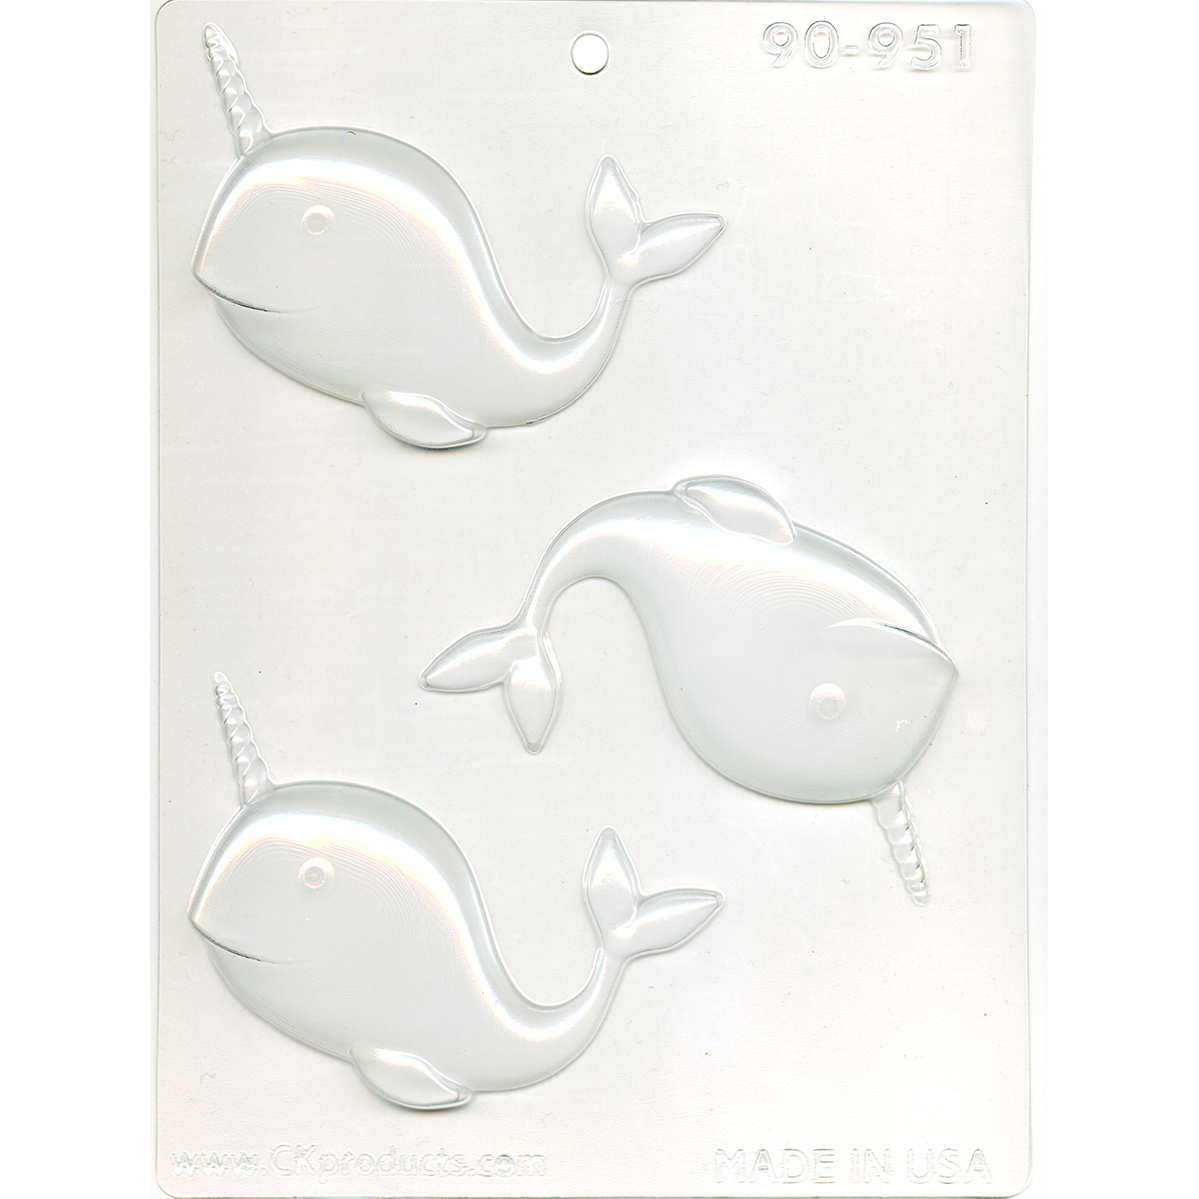 Narwhal Chocolate Mold